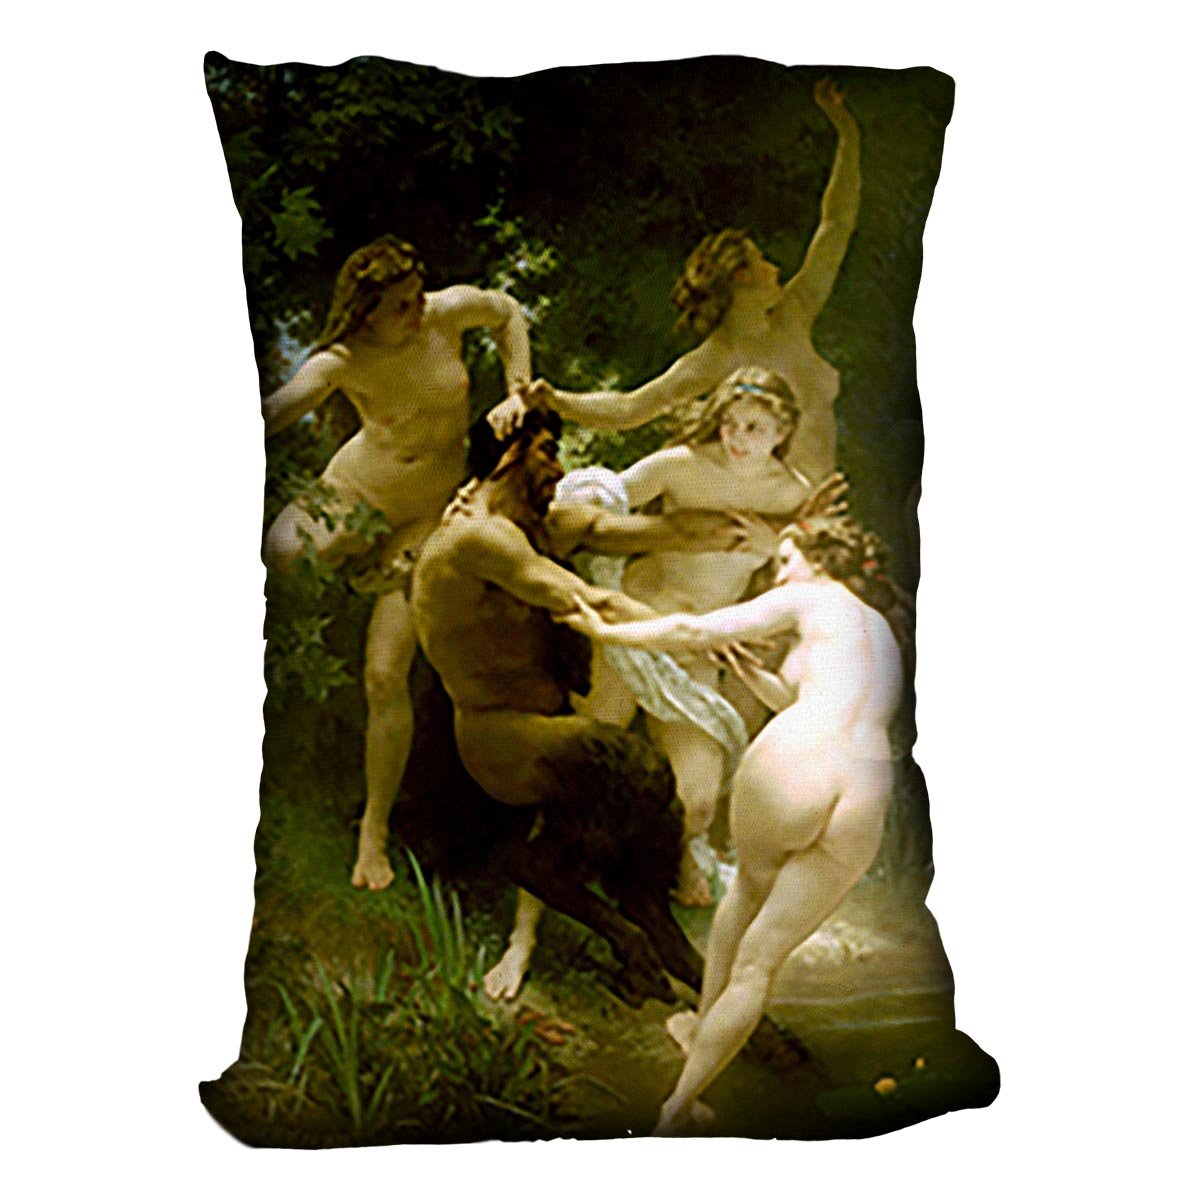 Nymphs and Satyr By Bouguereau Throw Pillow